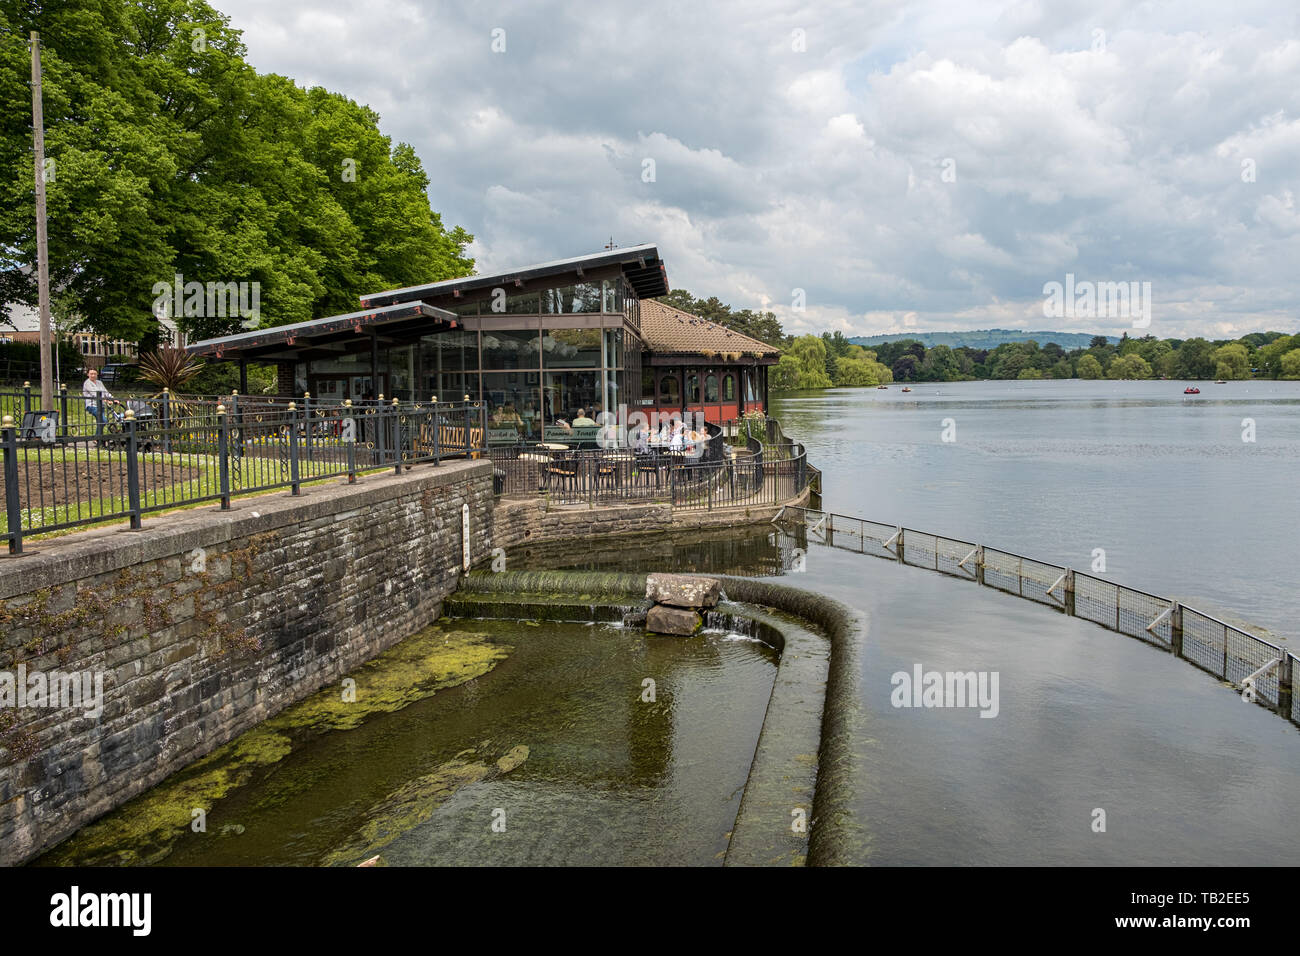 05/25/2019 The Terra Nova Café situated next to Roath Park Lake is a popular cafe for visitors with views over the water. Stock Photo